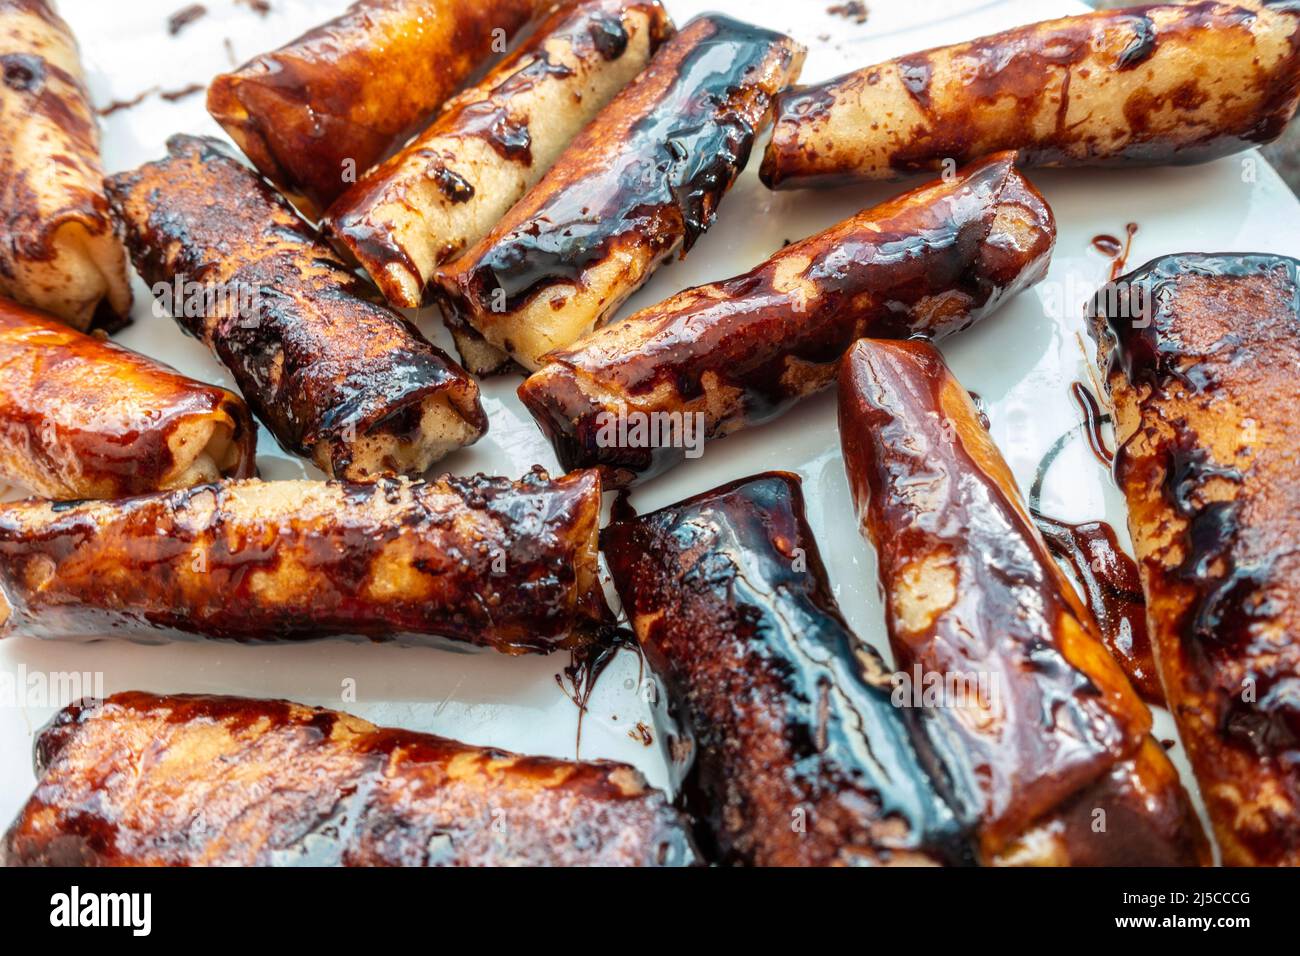 Tuoon, a popular Filipino street food of bananas and jack fruit deep fried in spring roll pastry. Stock Photo